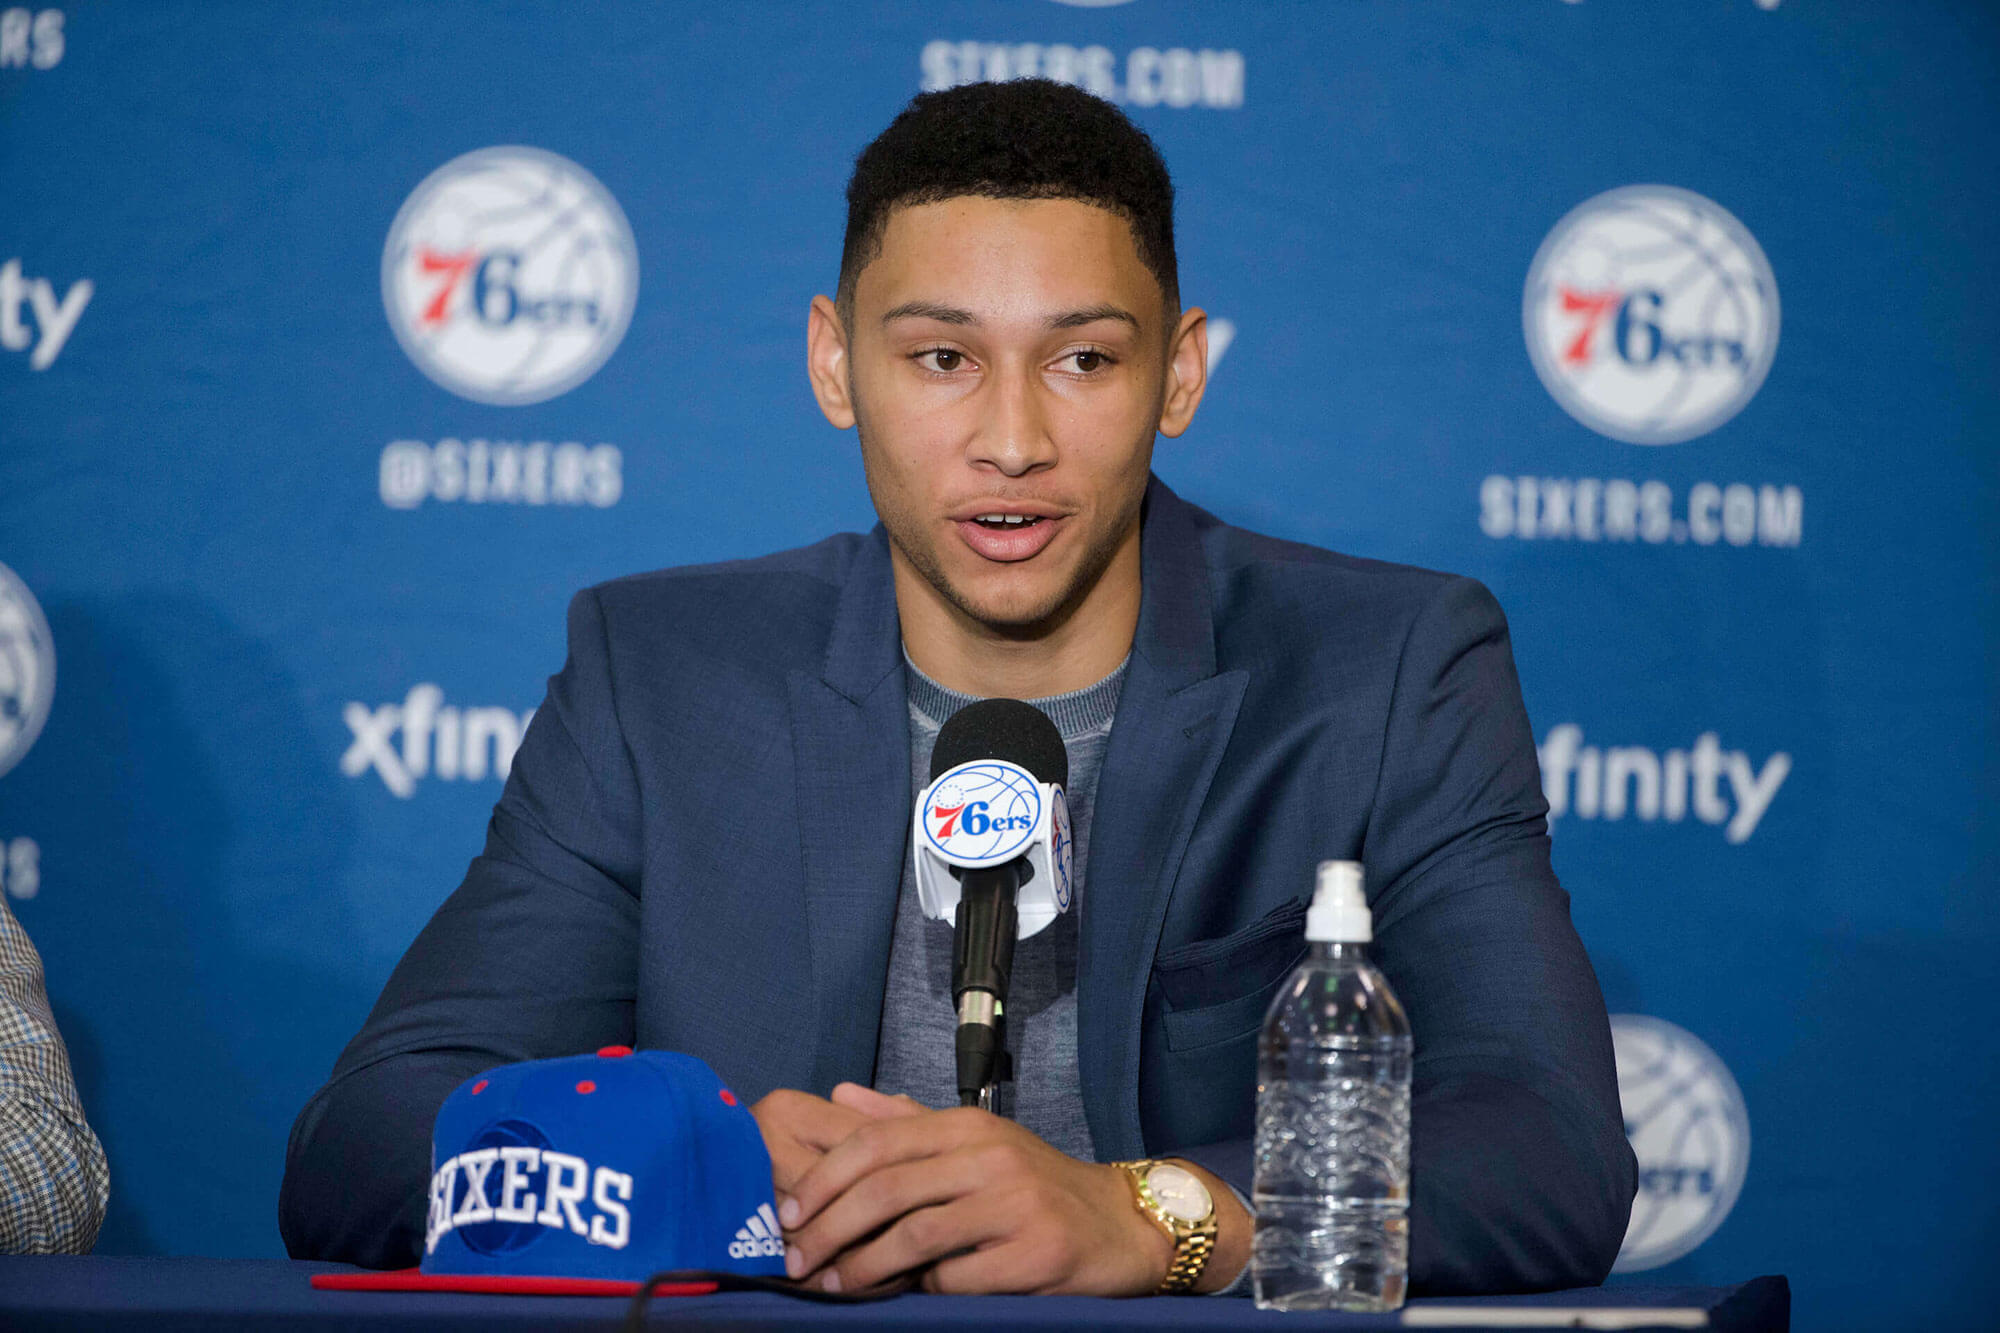 Ben Simmons speaks at a news conference after he is drafted by the 76ers.